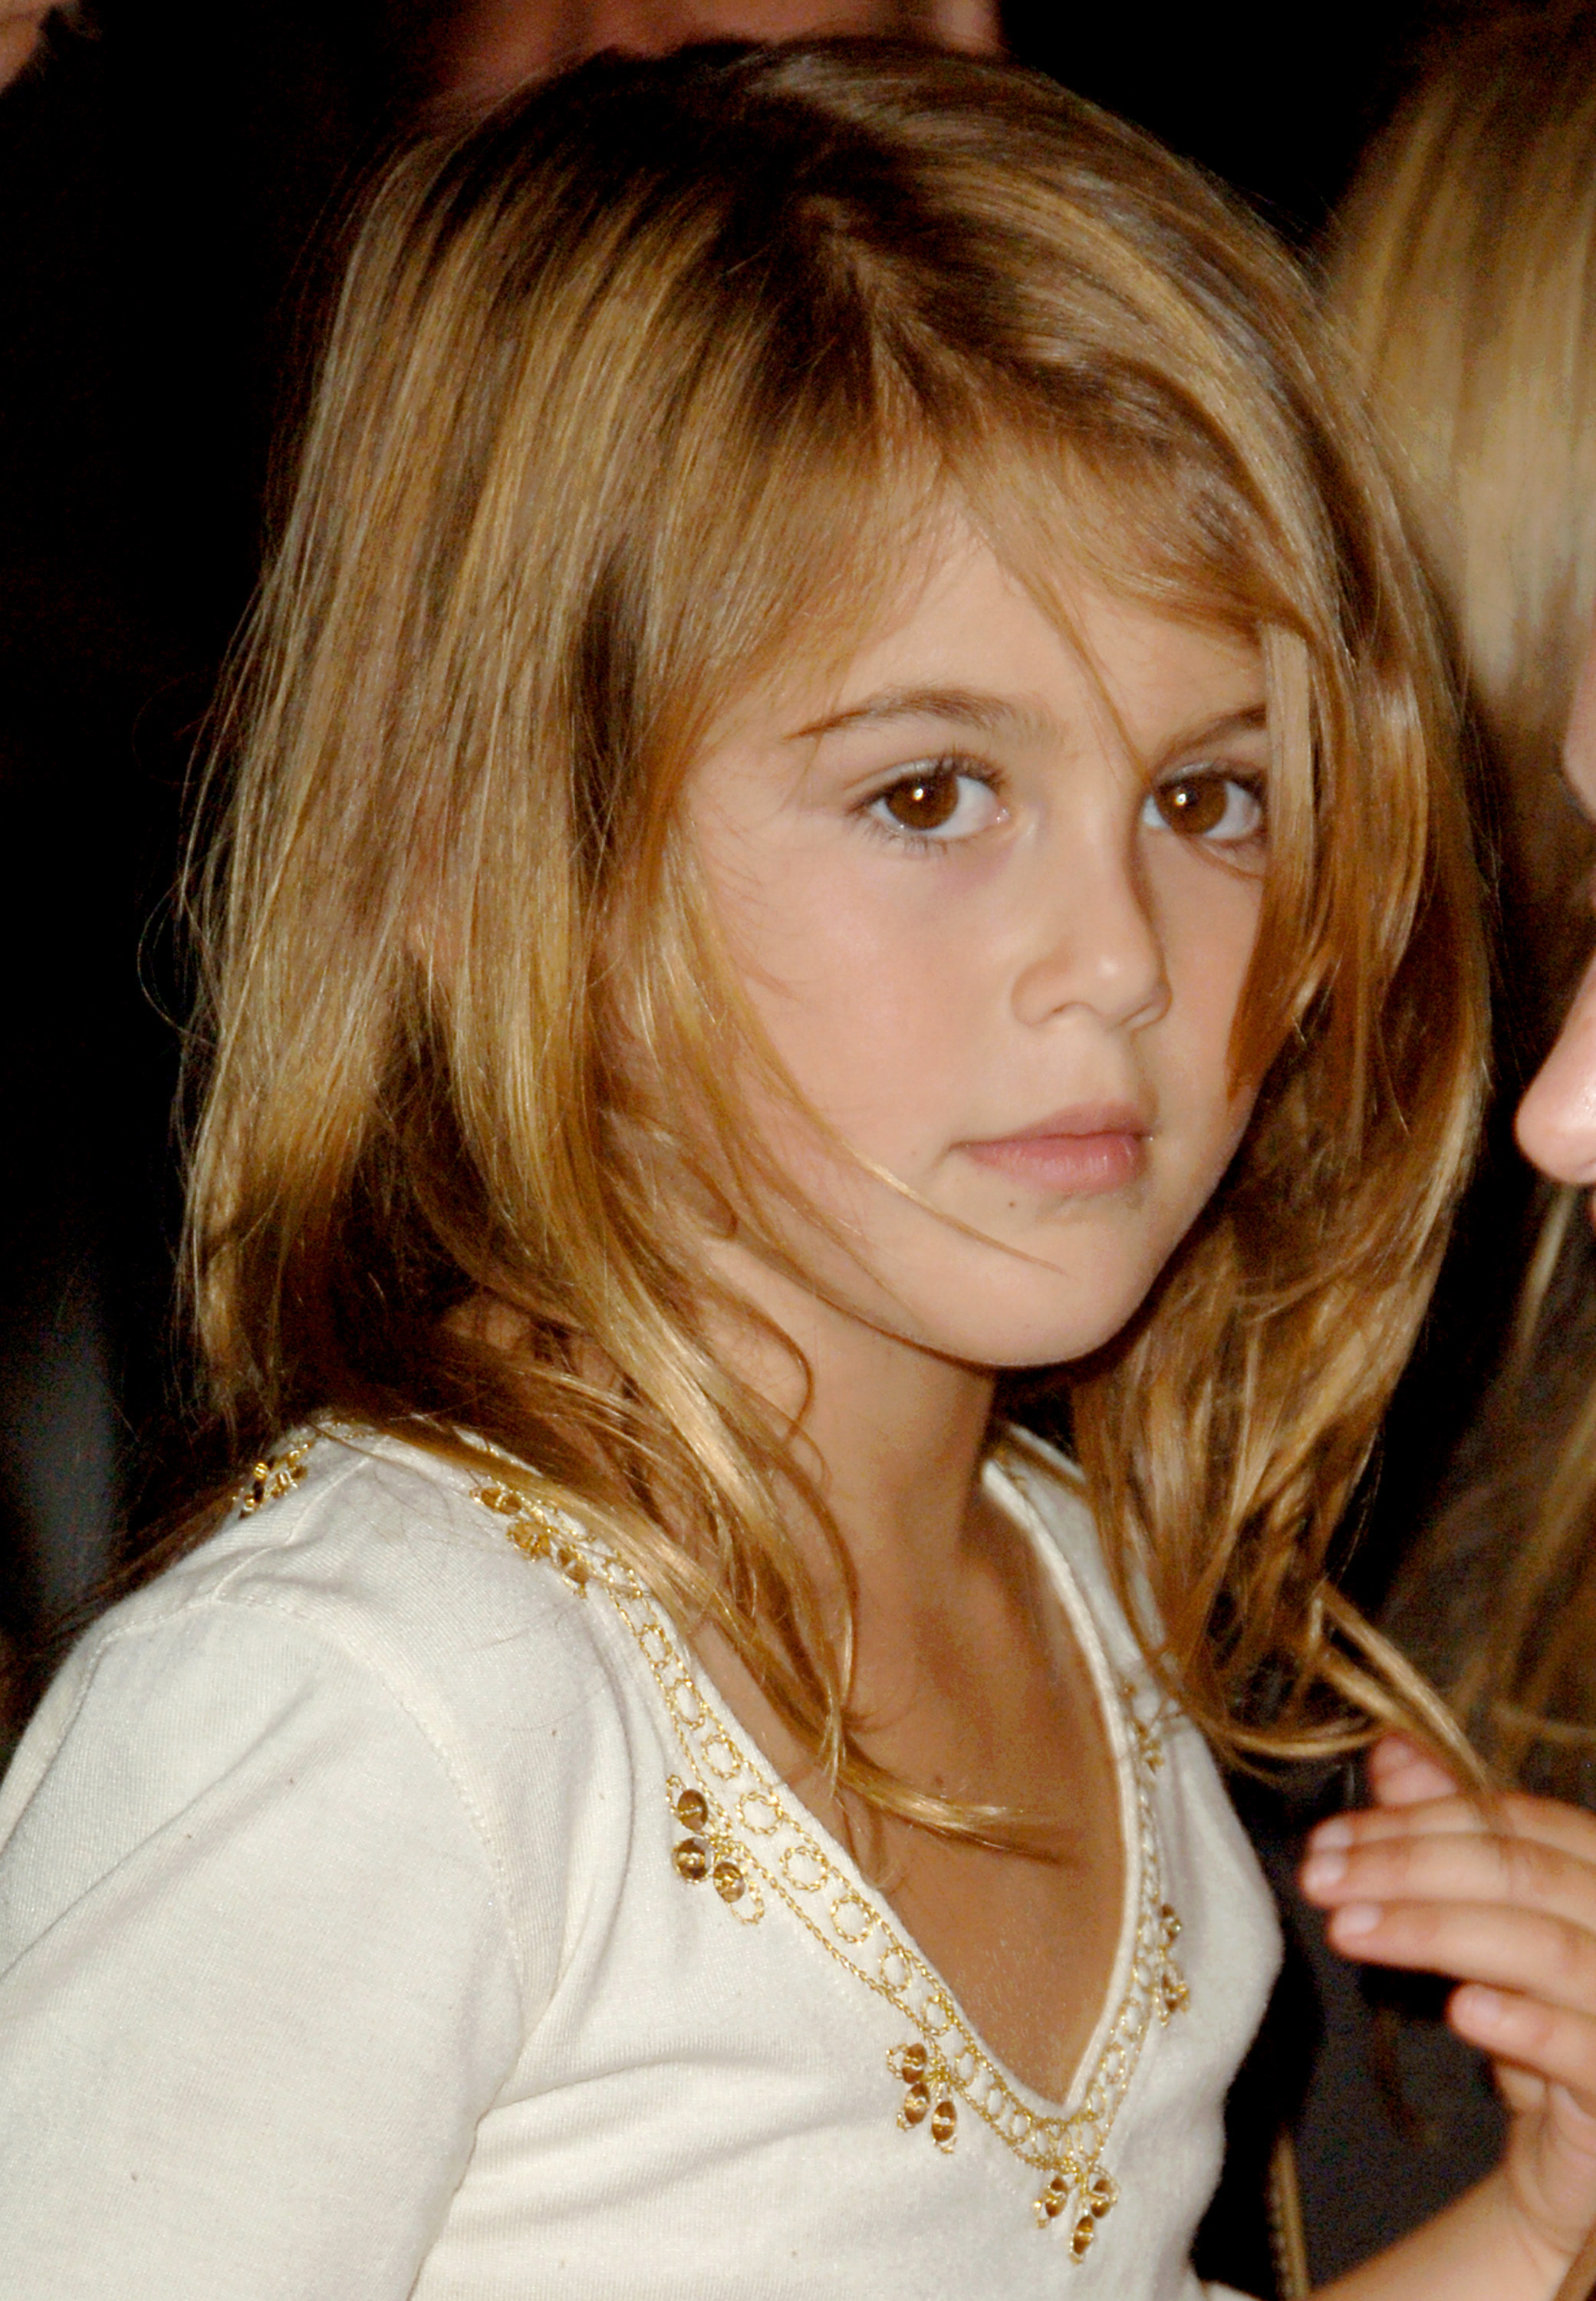 Kaia Gerber during Runway For Life at The Beverly Hilton on September 15, 2006 in Beverly Hills, California | Source: Getty Images